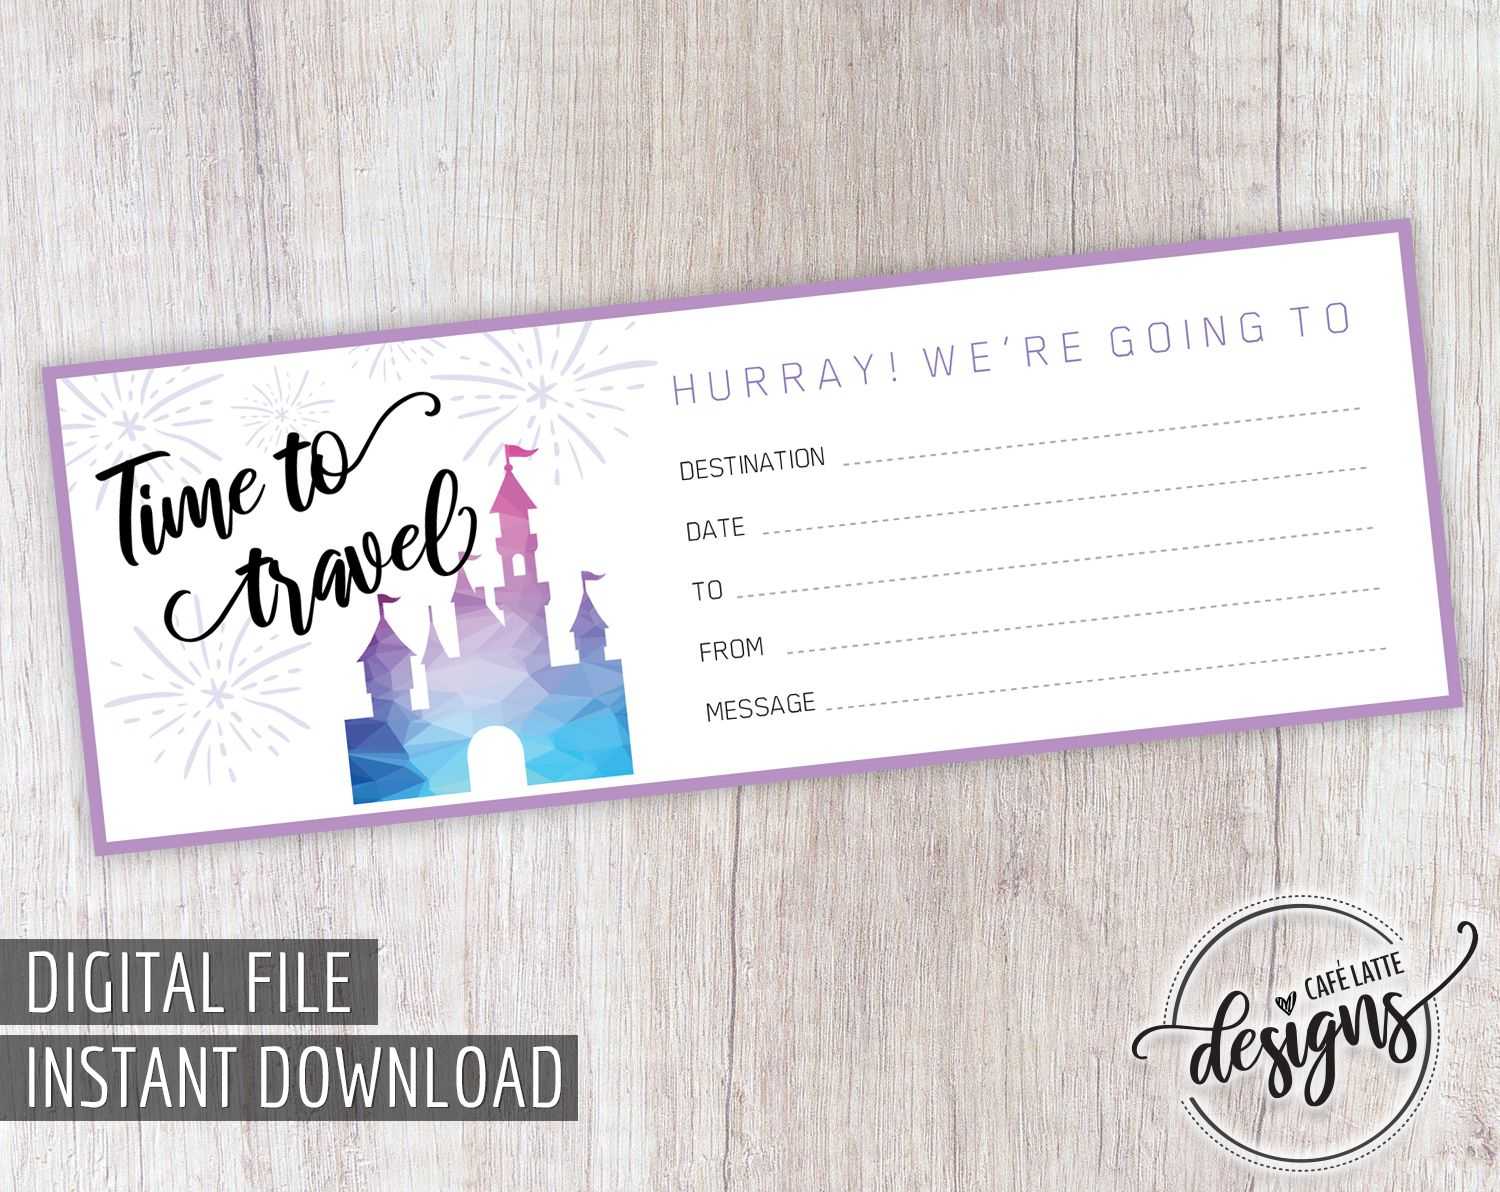 012 Travel Gift Certificate Template Stirring Ideas For Free Travel Gift Certificate Template